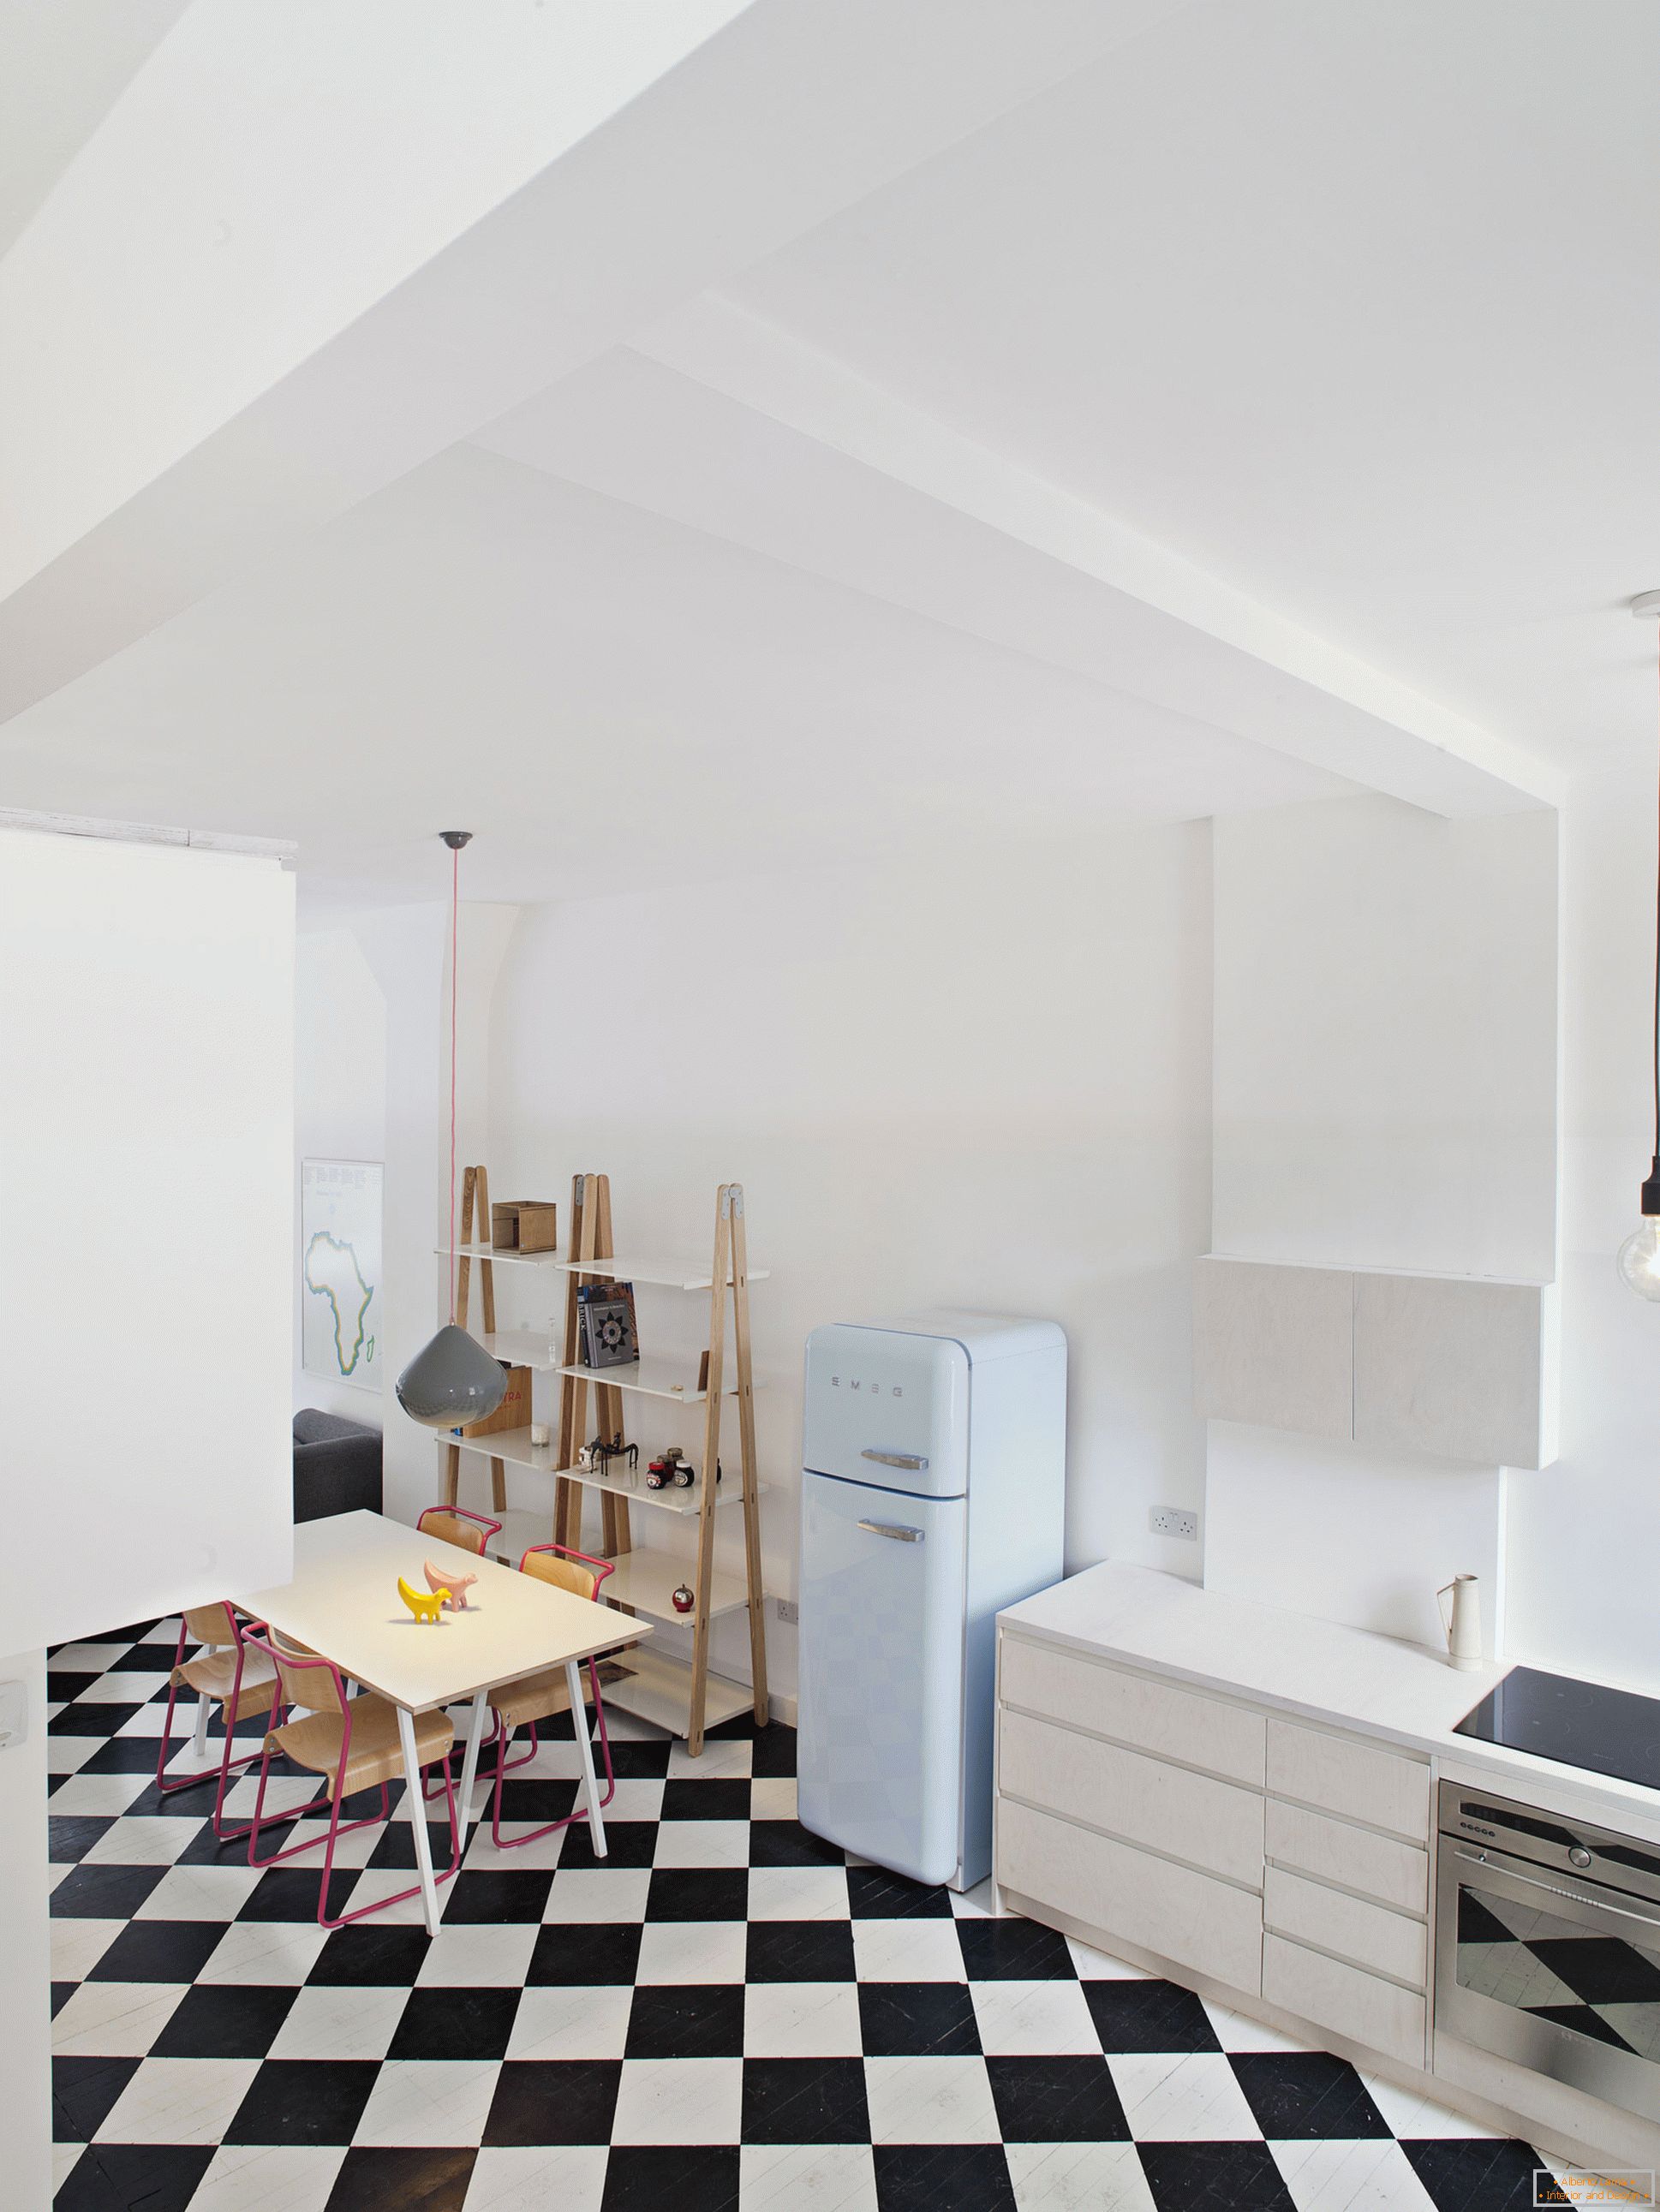 City View House - bakery, converted into a residential studio apartment, London, UK